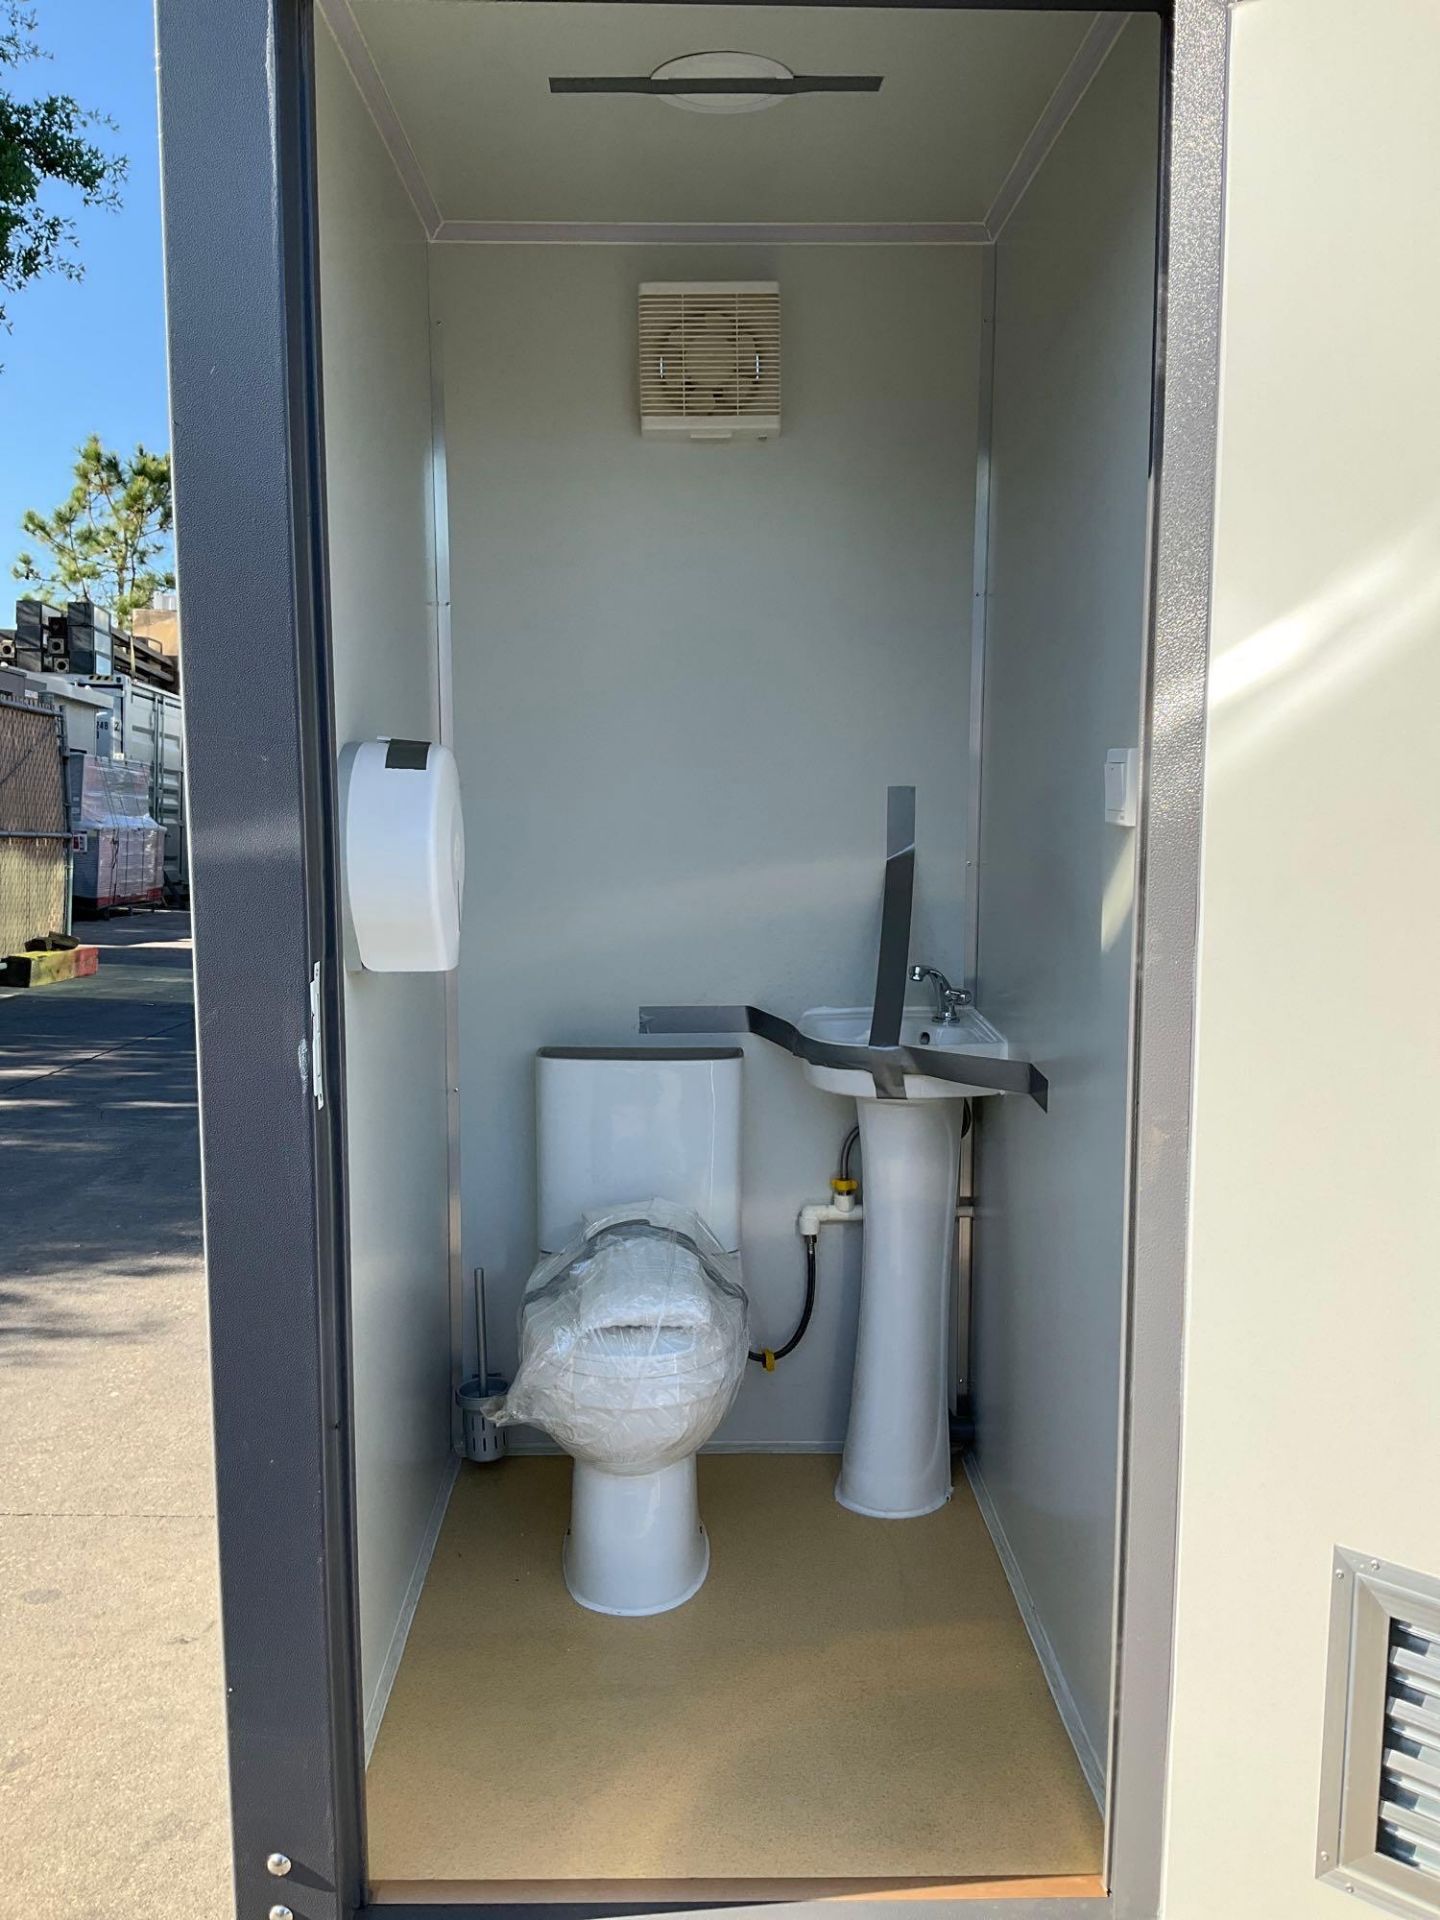 UNUSED PORTABLE DOUBLE BATHROOM UNIT, 2 STALLS, ELECTRIC & PLUMBING HOOK UP WITH EXTERIOR PLUMBING C - Image 10 of 12